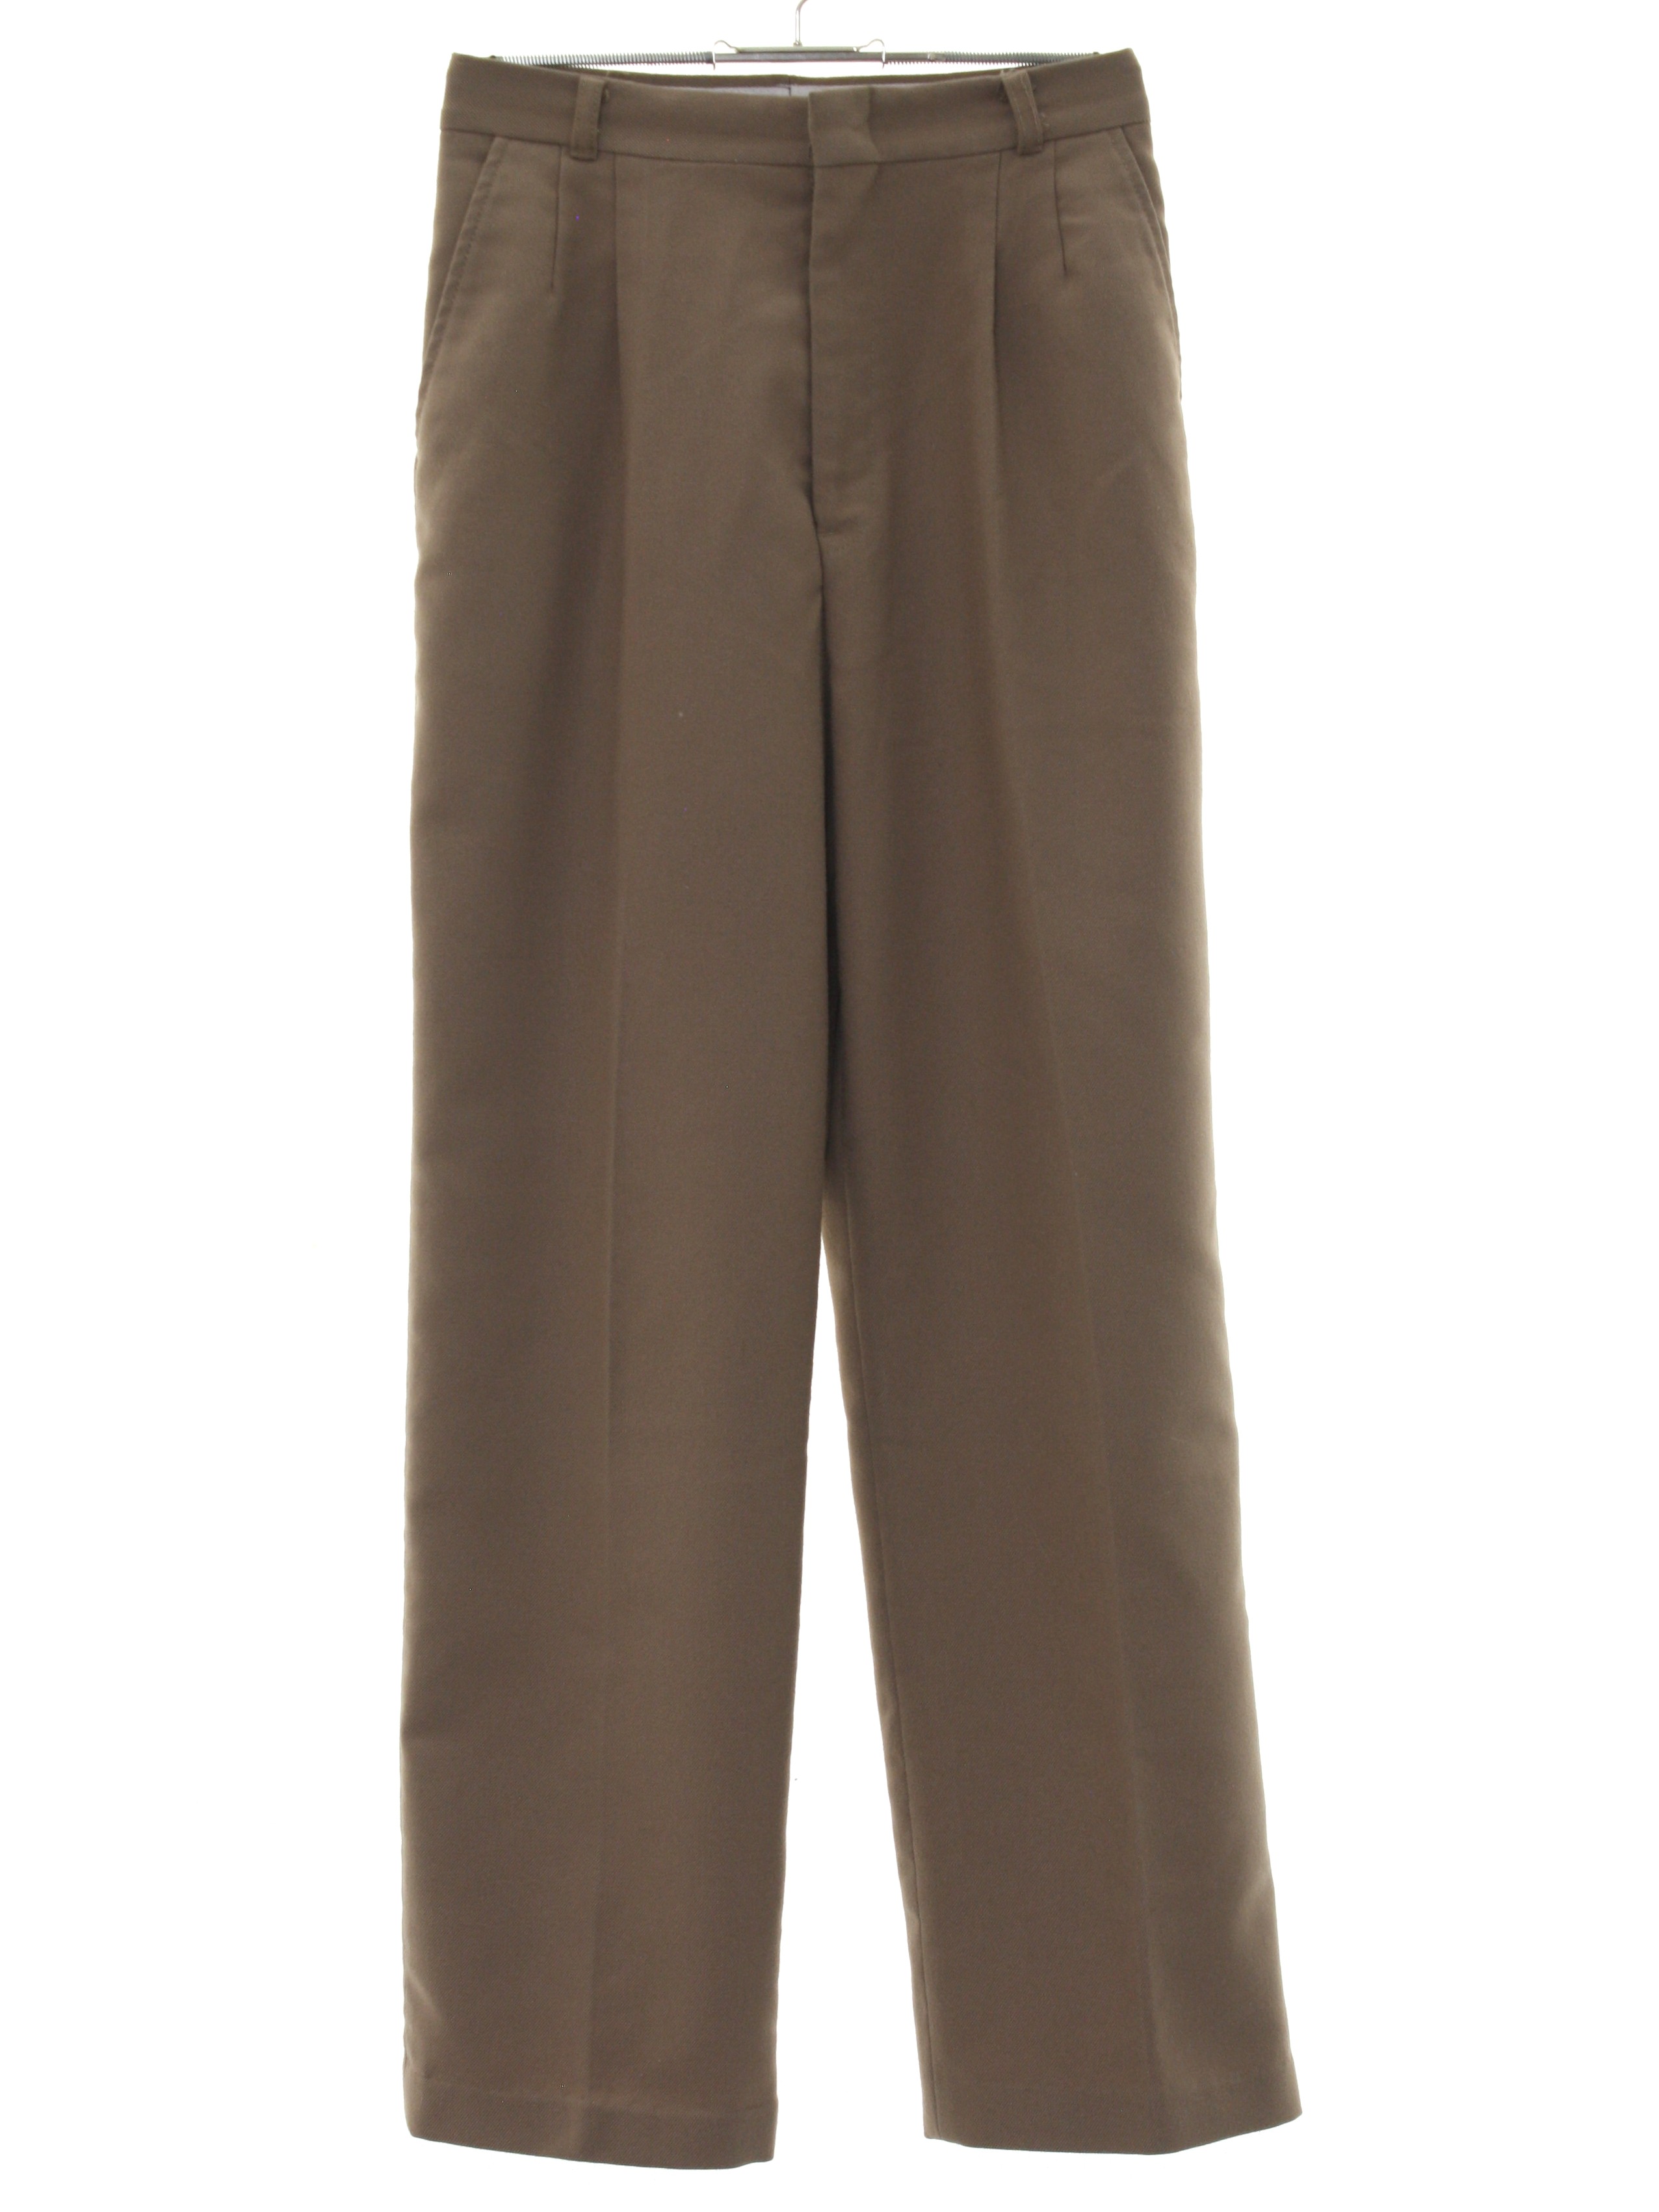 80s Retro Pants: 80s -The Fashion Place- Womens camel colored tan solid ...